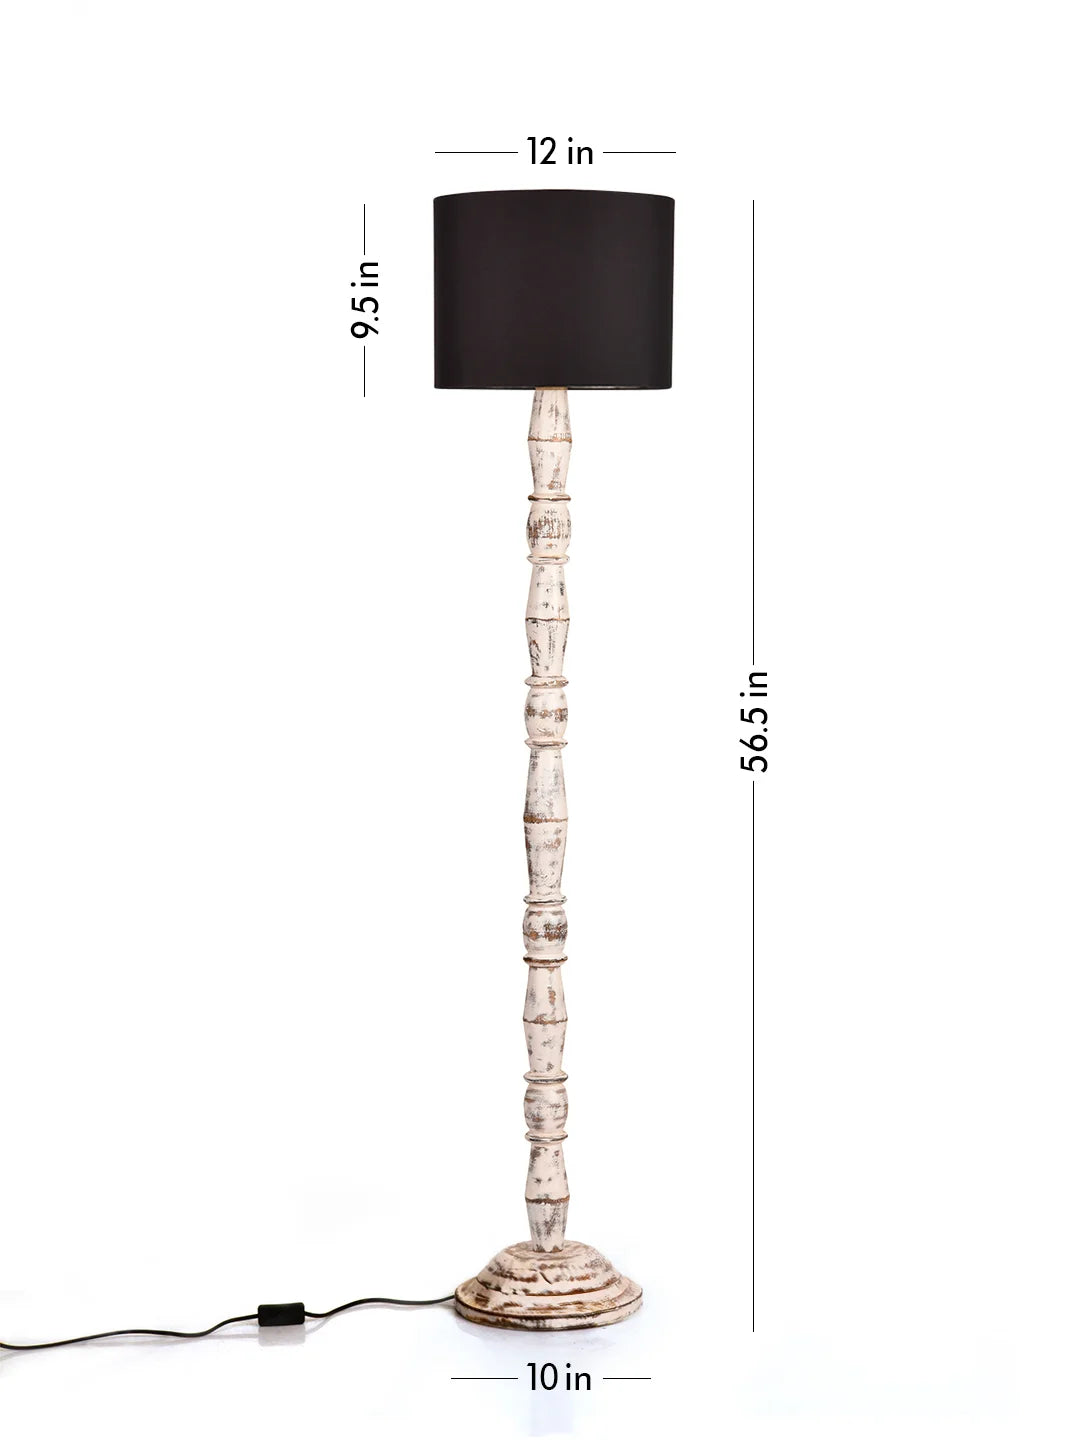 Distress White Floor Lamp with Black Cotton Shade